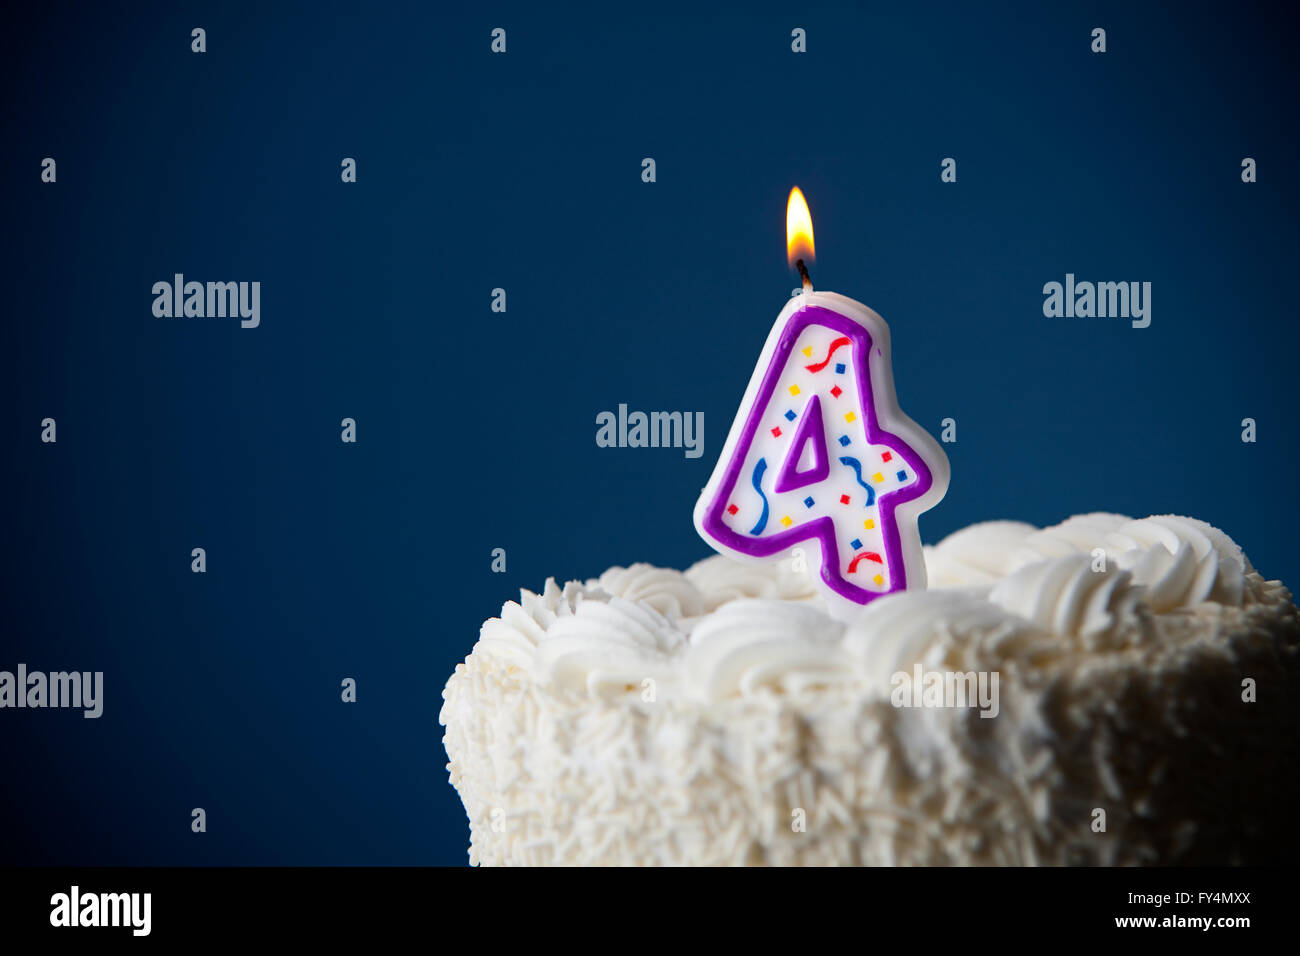 White iced cake on blue background with candles to celebrate various birthdays. Stock Photo